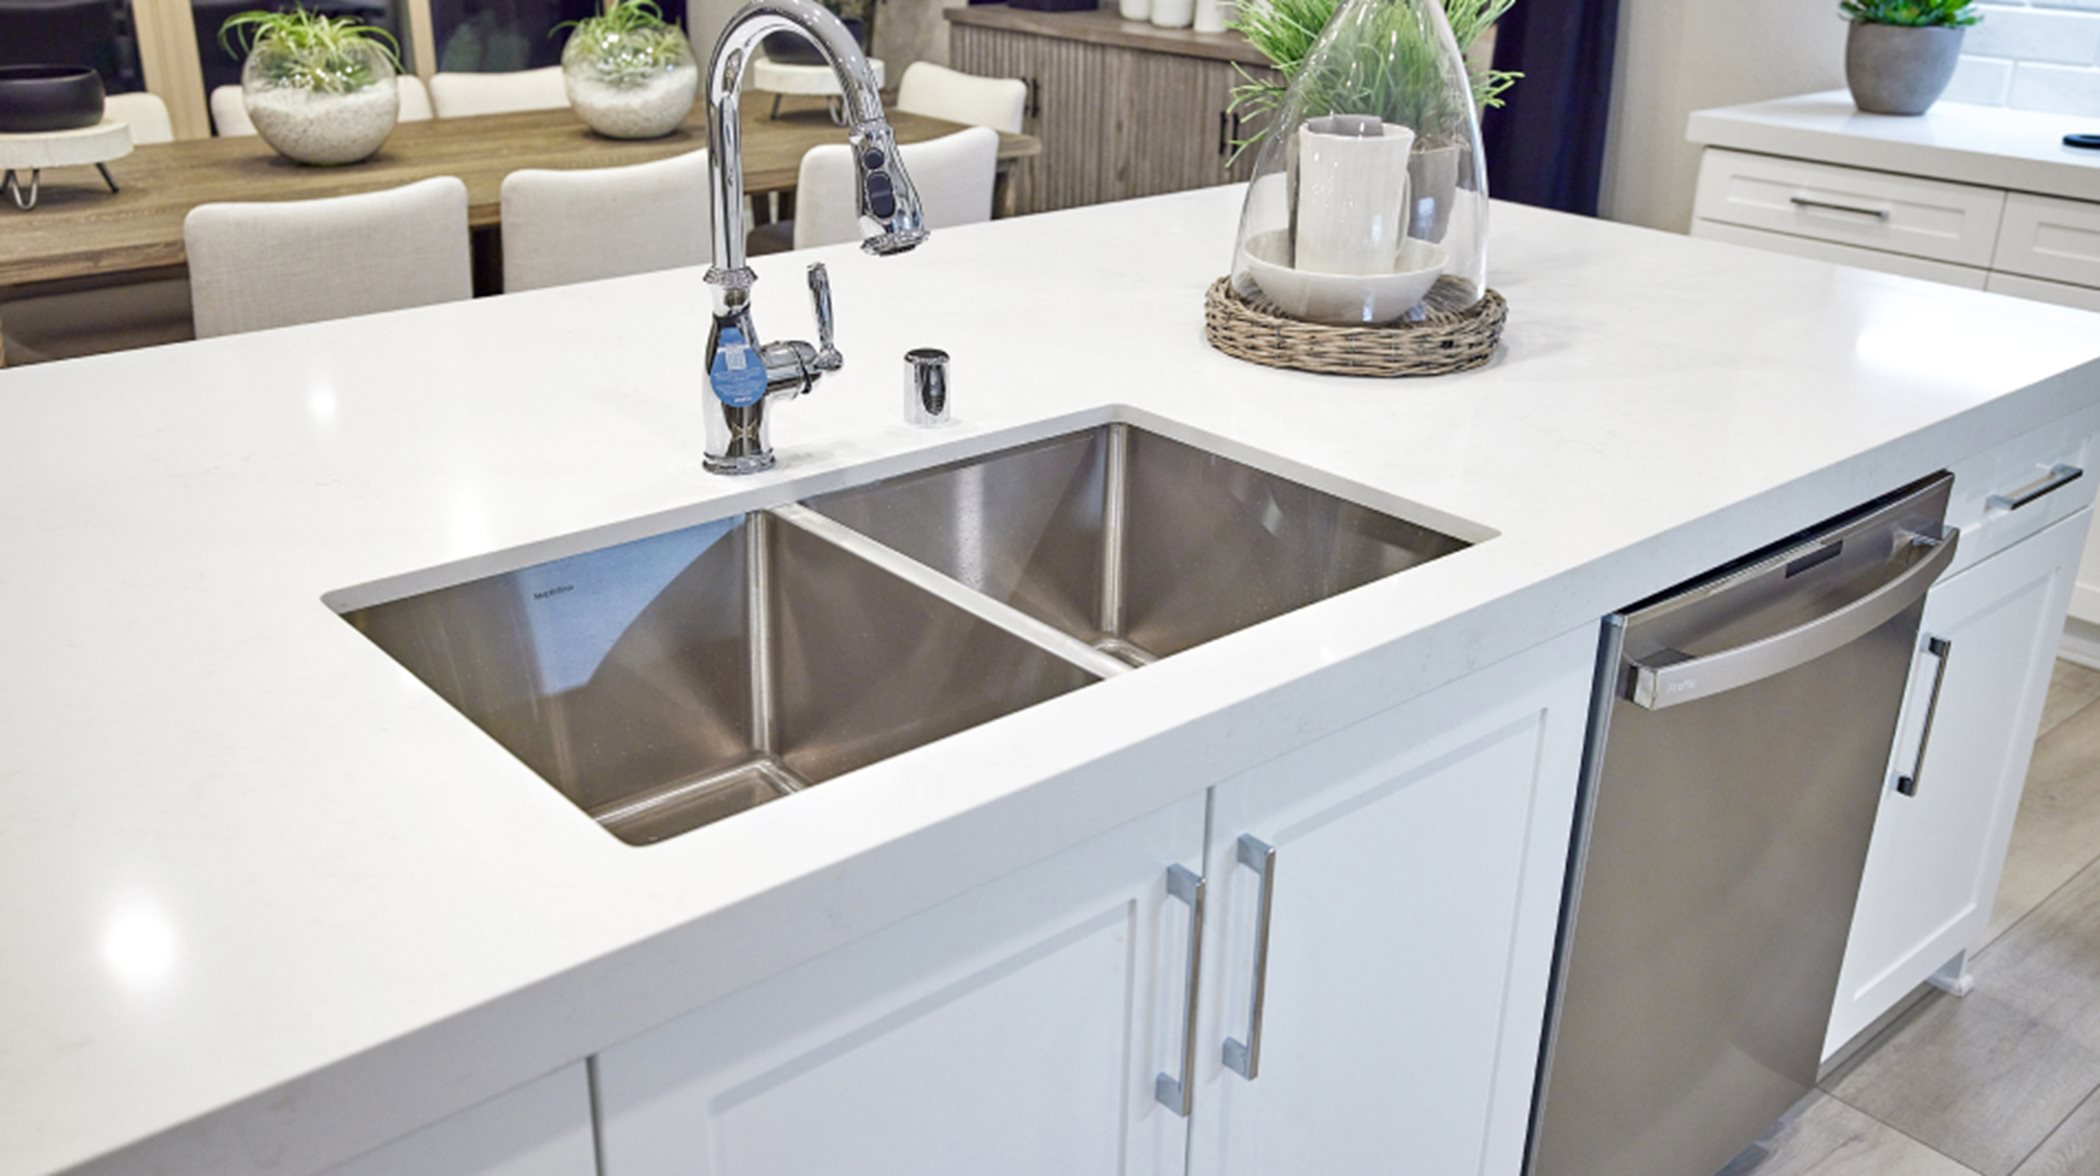 Kitchen sink and pulldown faucet